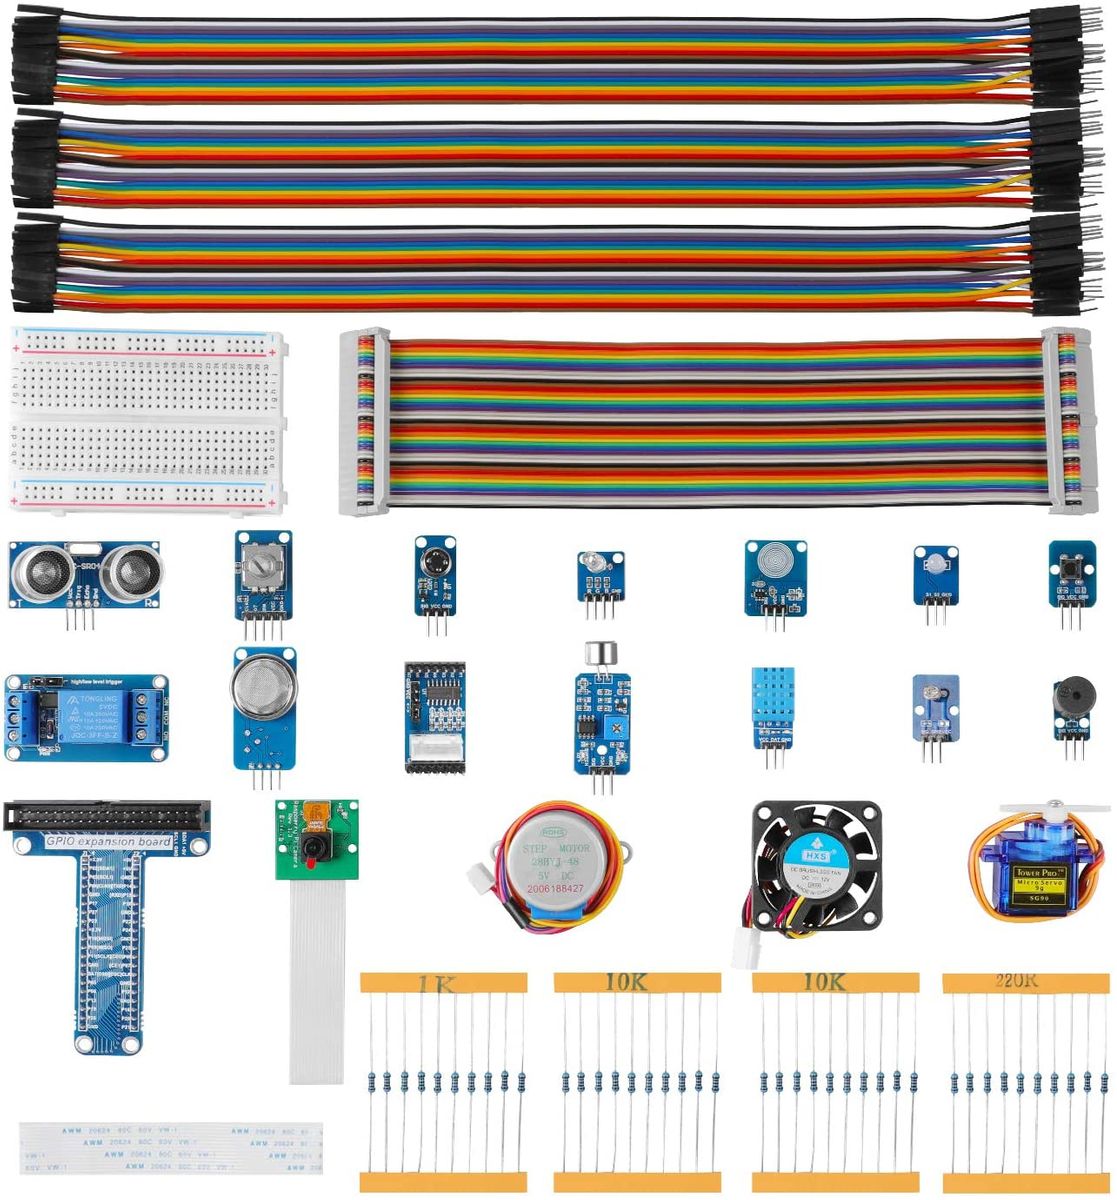 LABISTS Ultimate Starter Kit, Raspberry Pi Starter Kit, Support Python C, with Free Tutorials, Solderless Breadboard and Accessories